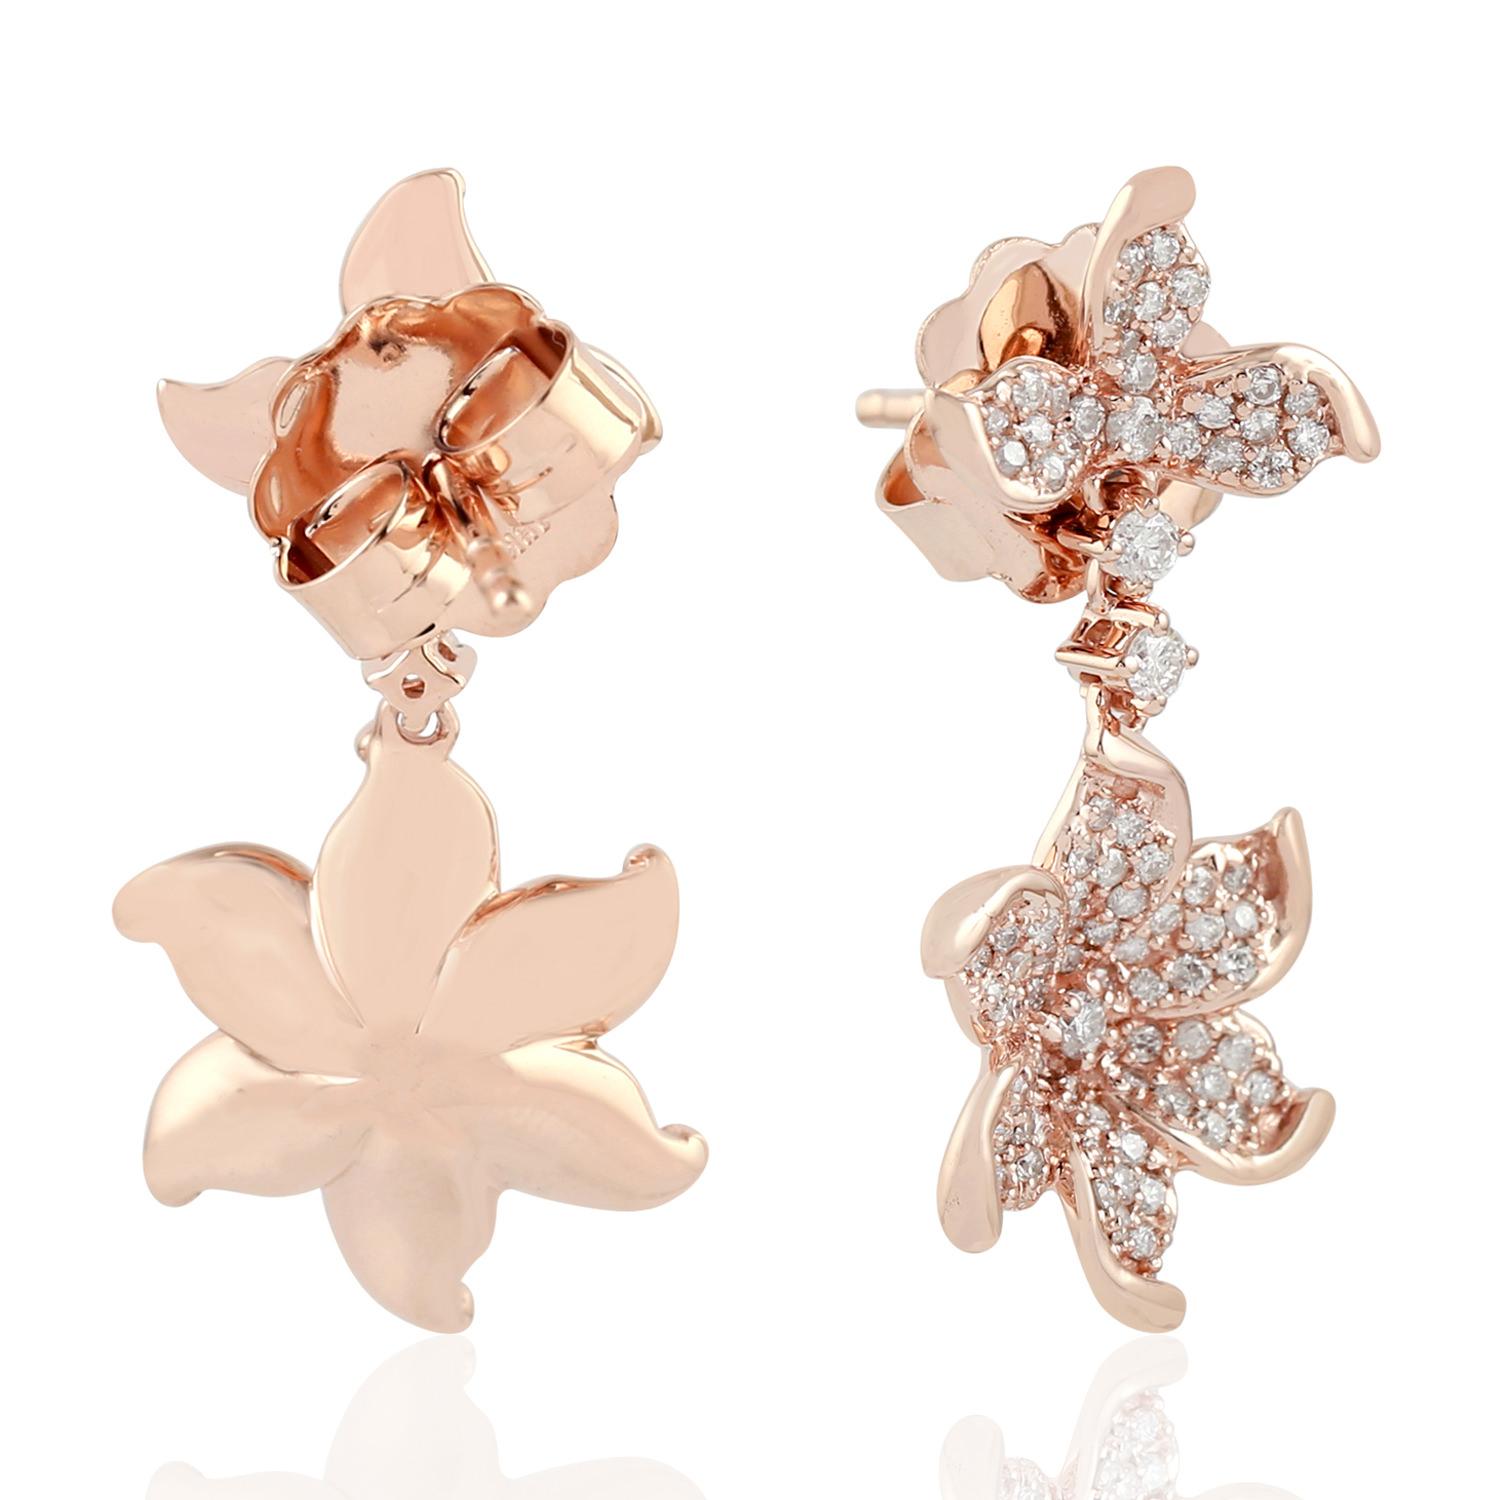 Modern Designer Floral Pattern Earrings with Pave Diamonds Made in 18k Rose Gold For Sale